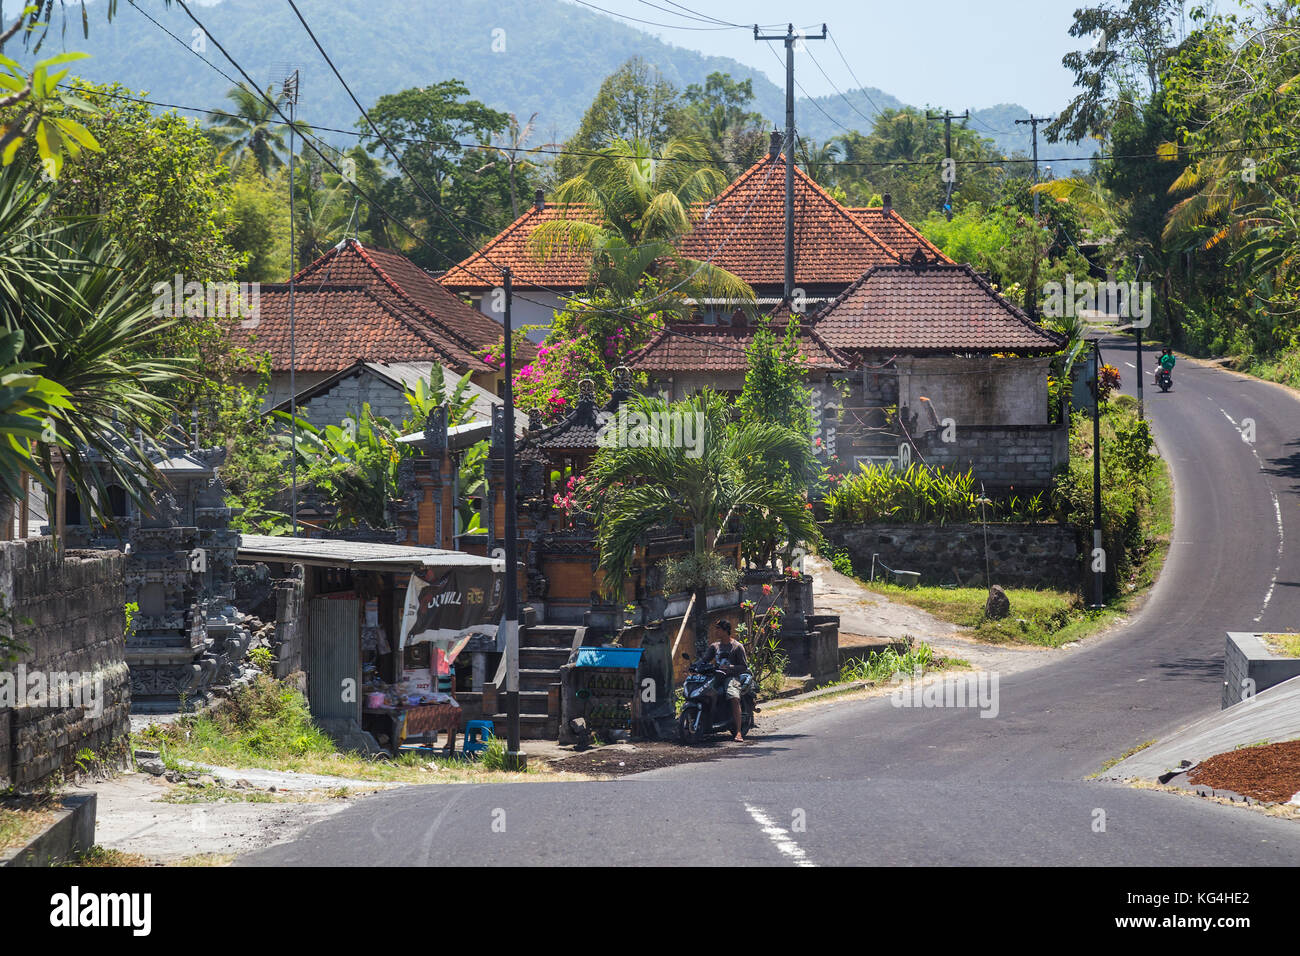 Streets of small towns in Bali, Indonesia Stock Photo